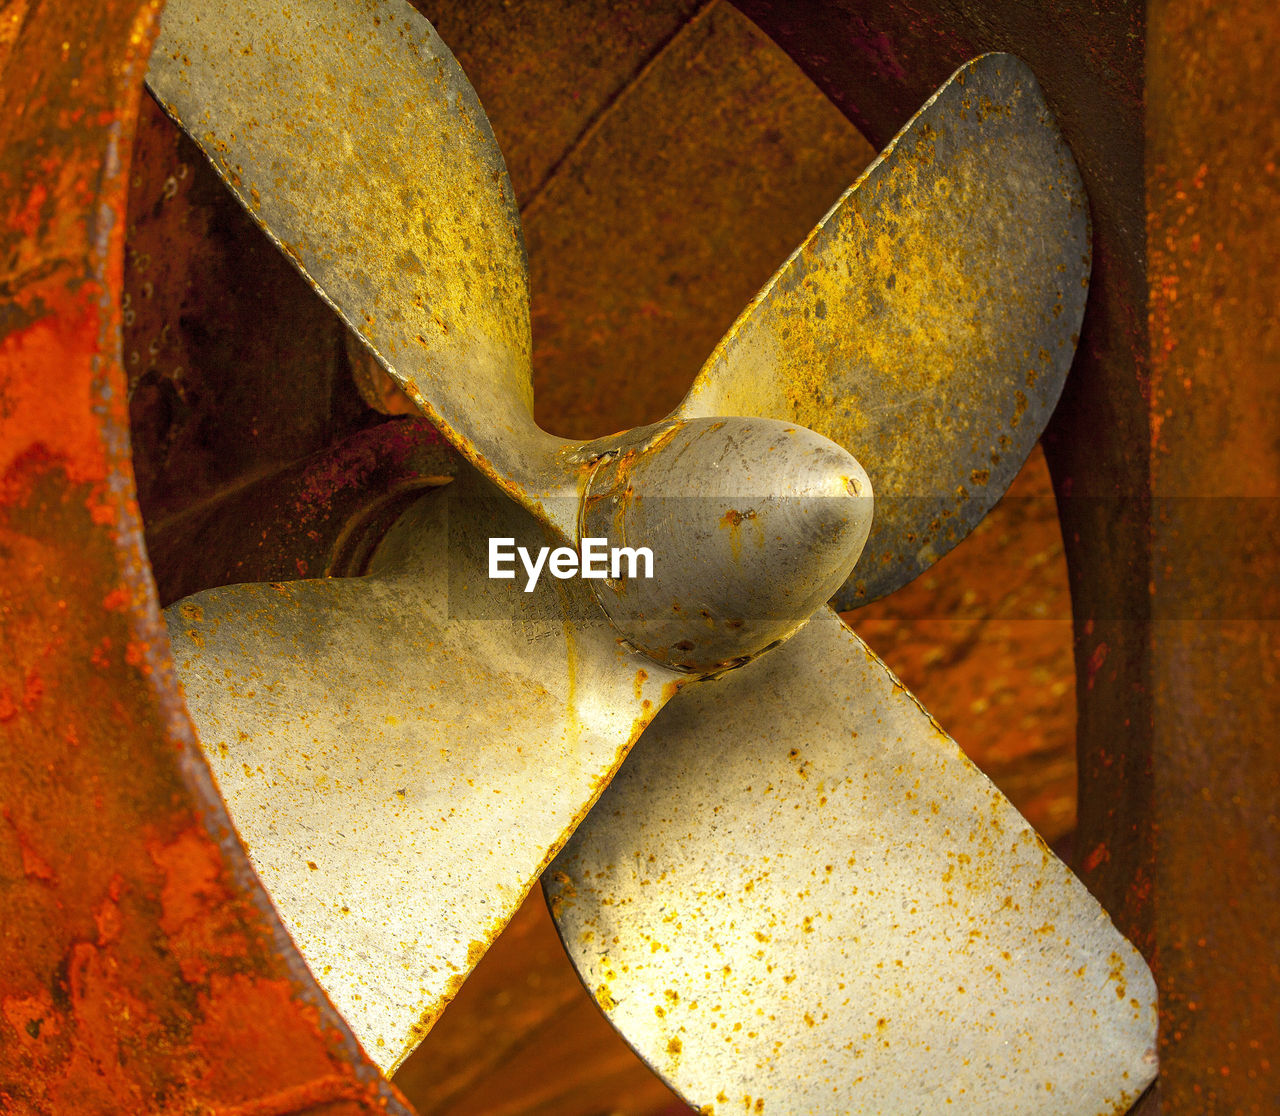 Ship propellers of a marine ship, which stands in a dry dock for repair